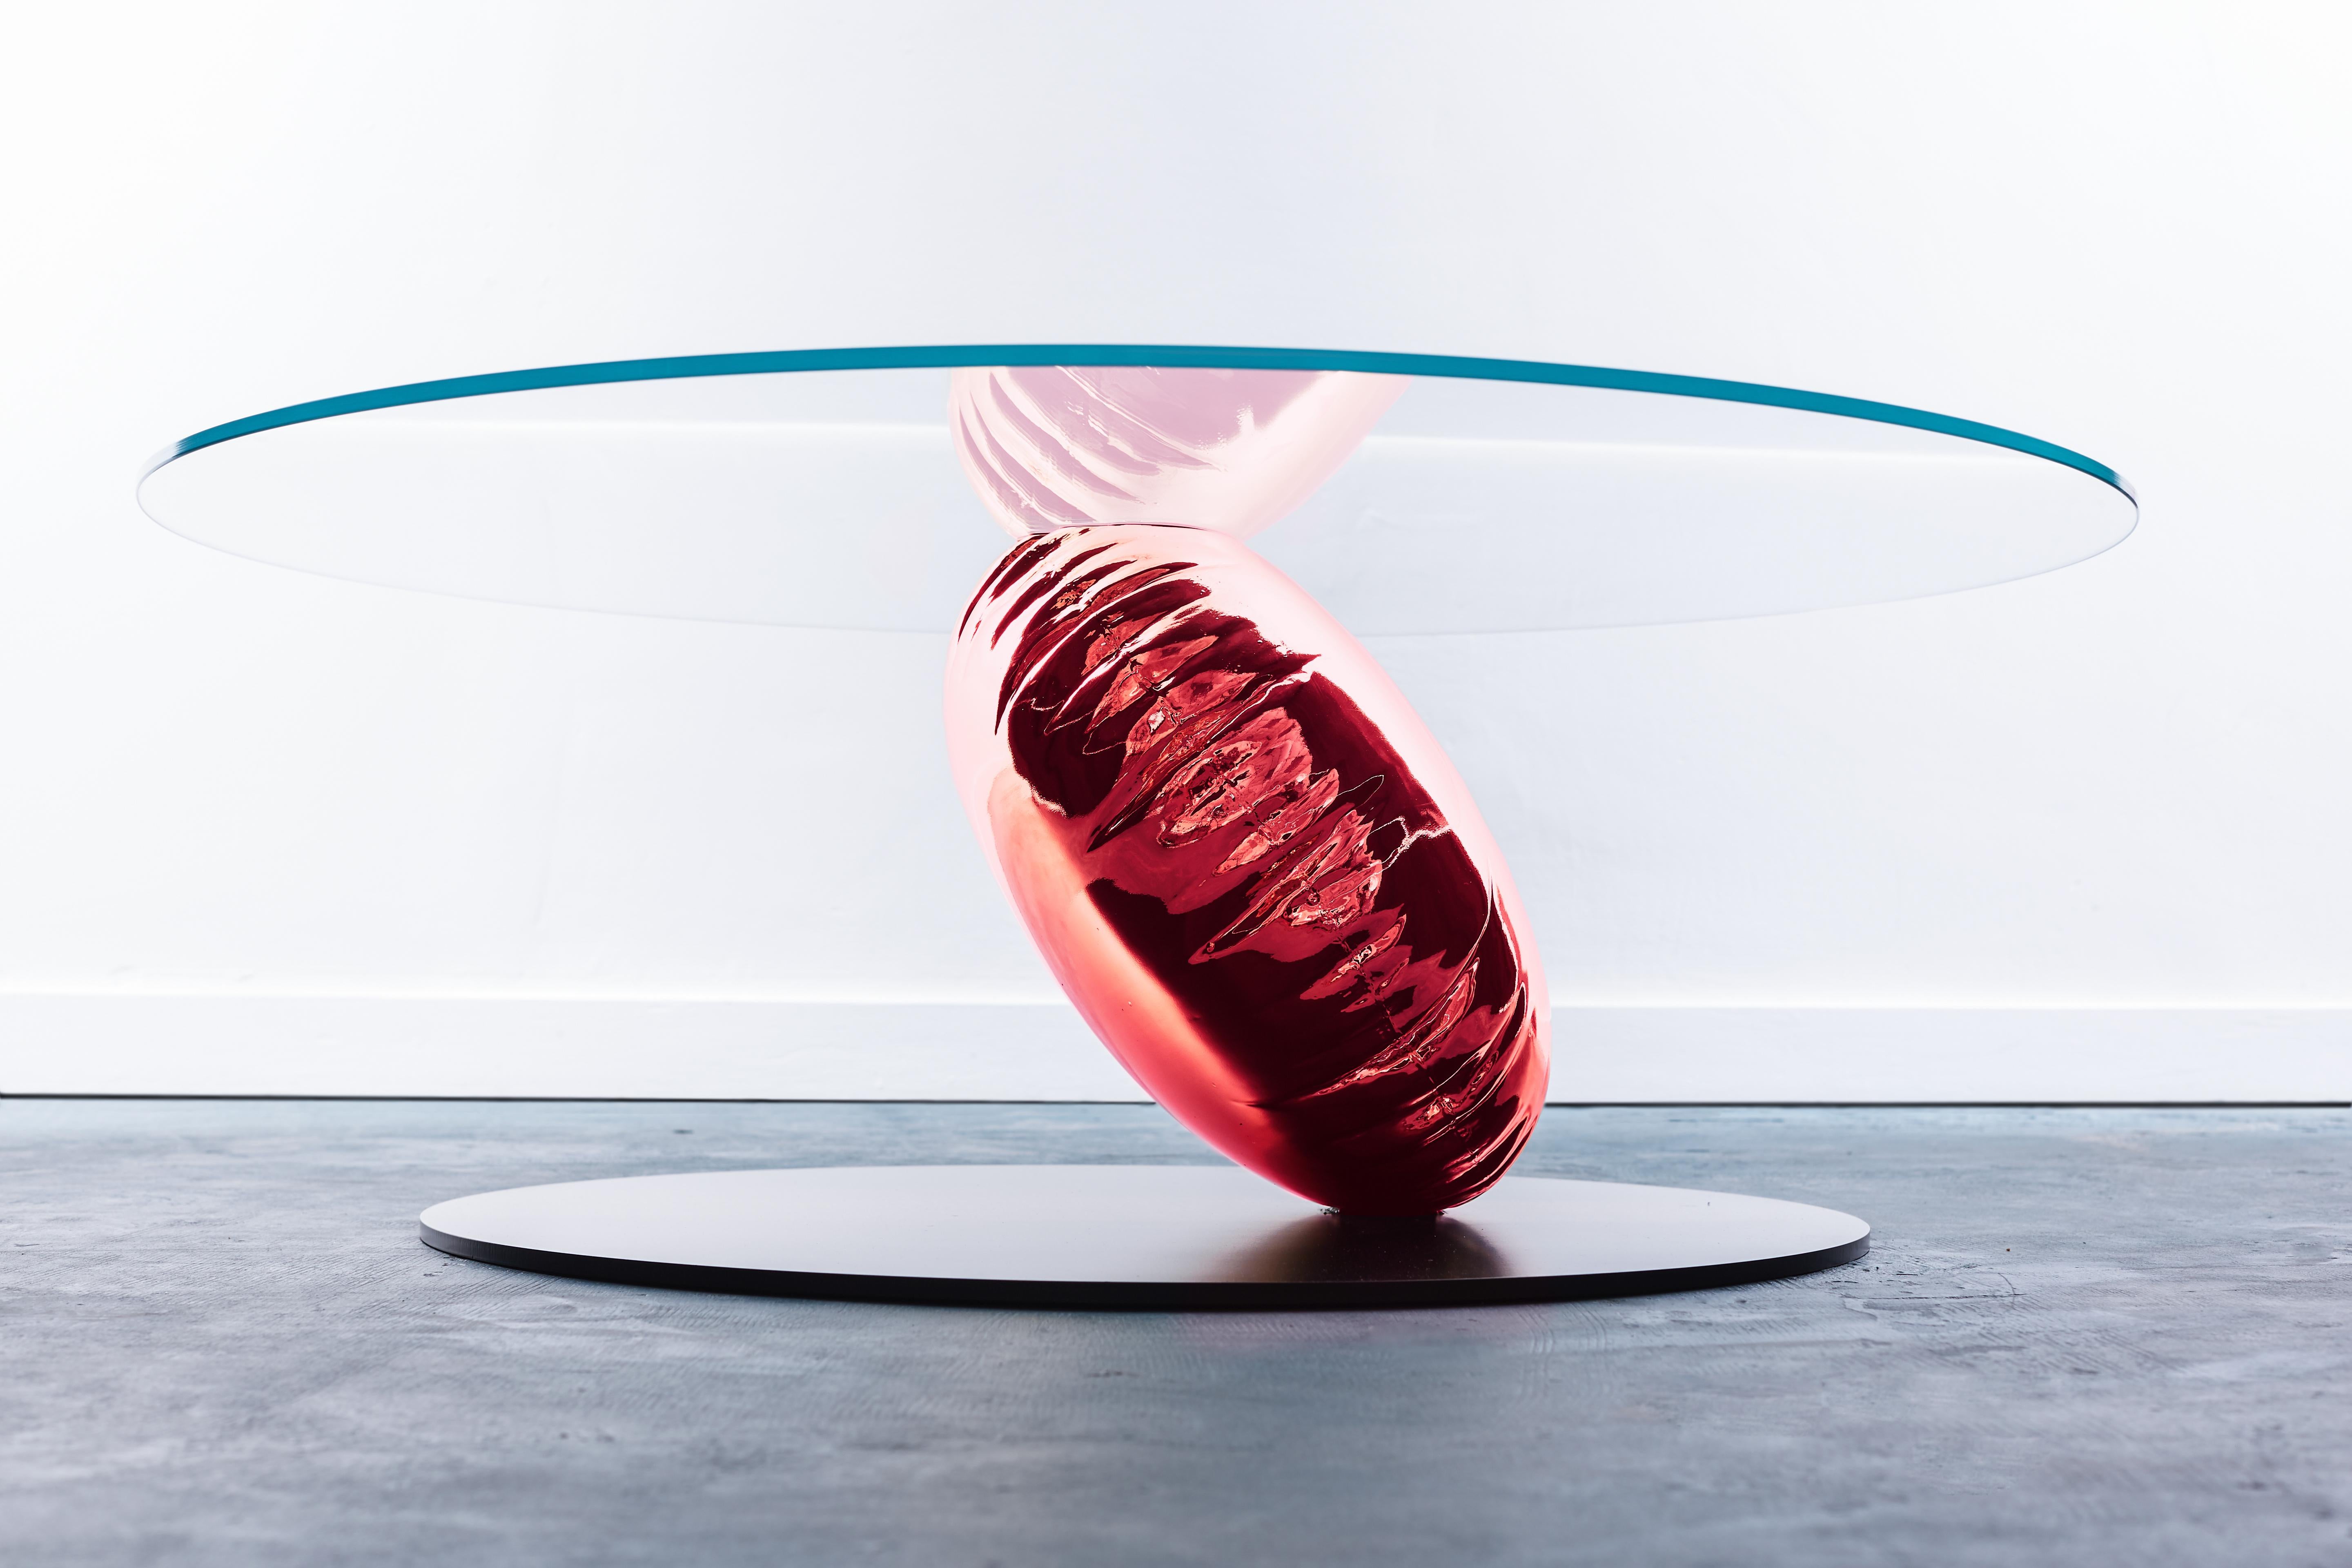 Balance is as much sculpture or art as furniture as it is a functional furniture piece.  An eye-catching, concept coffee table design from acclaimed British designer Christopher Duffy.

A single gold helium balloon stands on a thin black disc giving